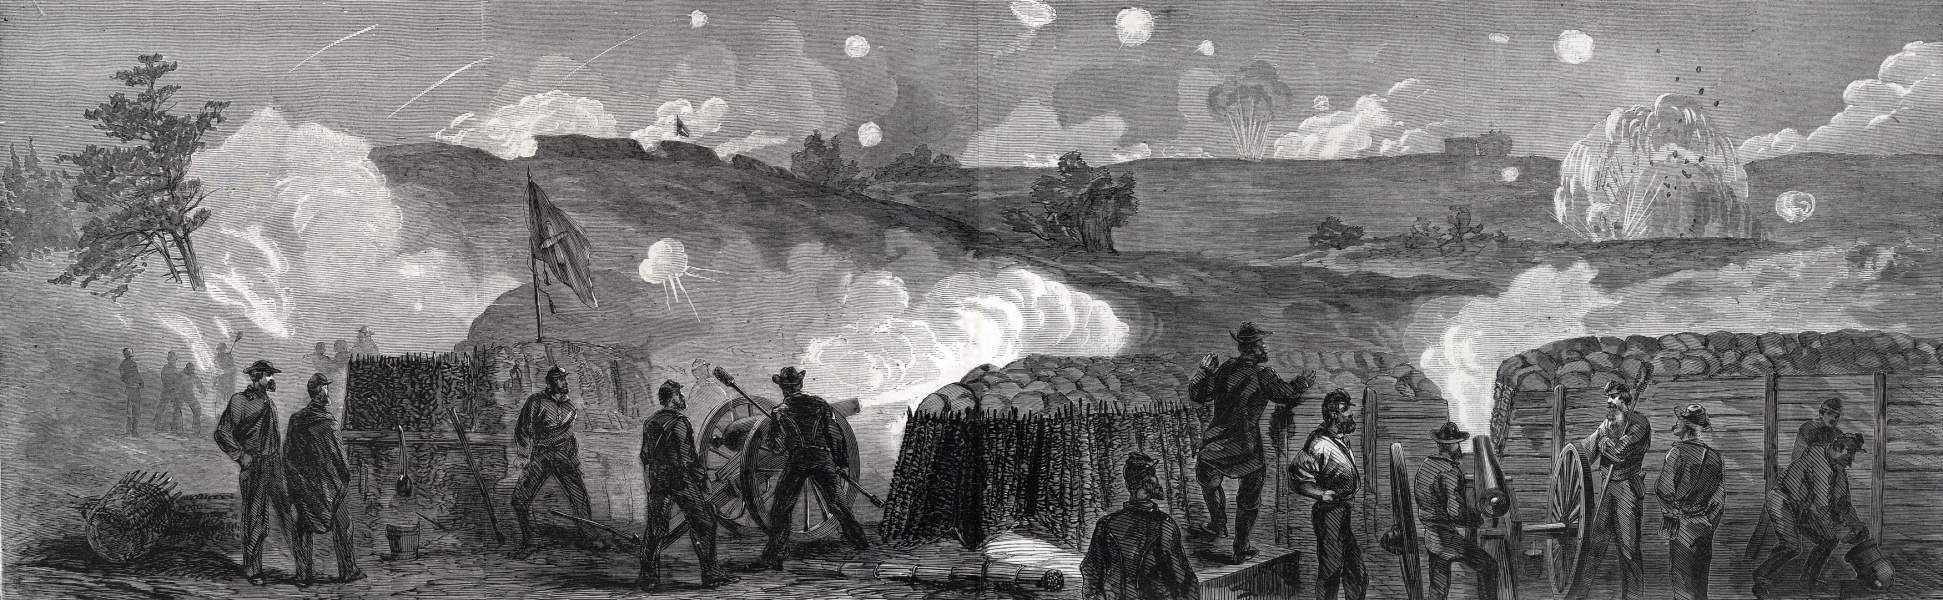 Union night bombardment, Petersburg, Virginia, September, 1864, artist's impression, zoomable image